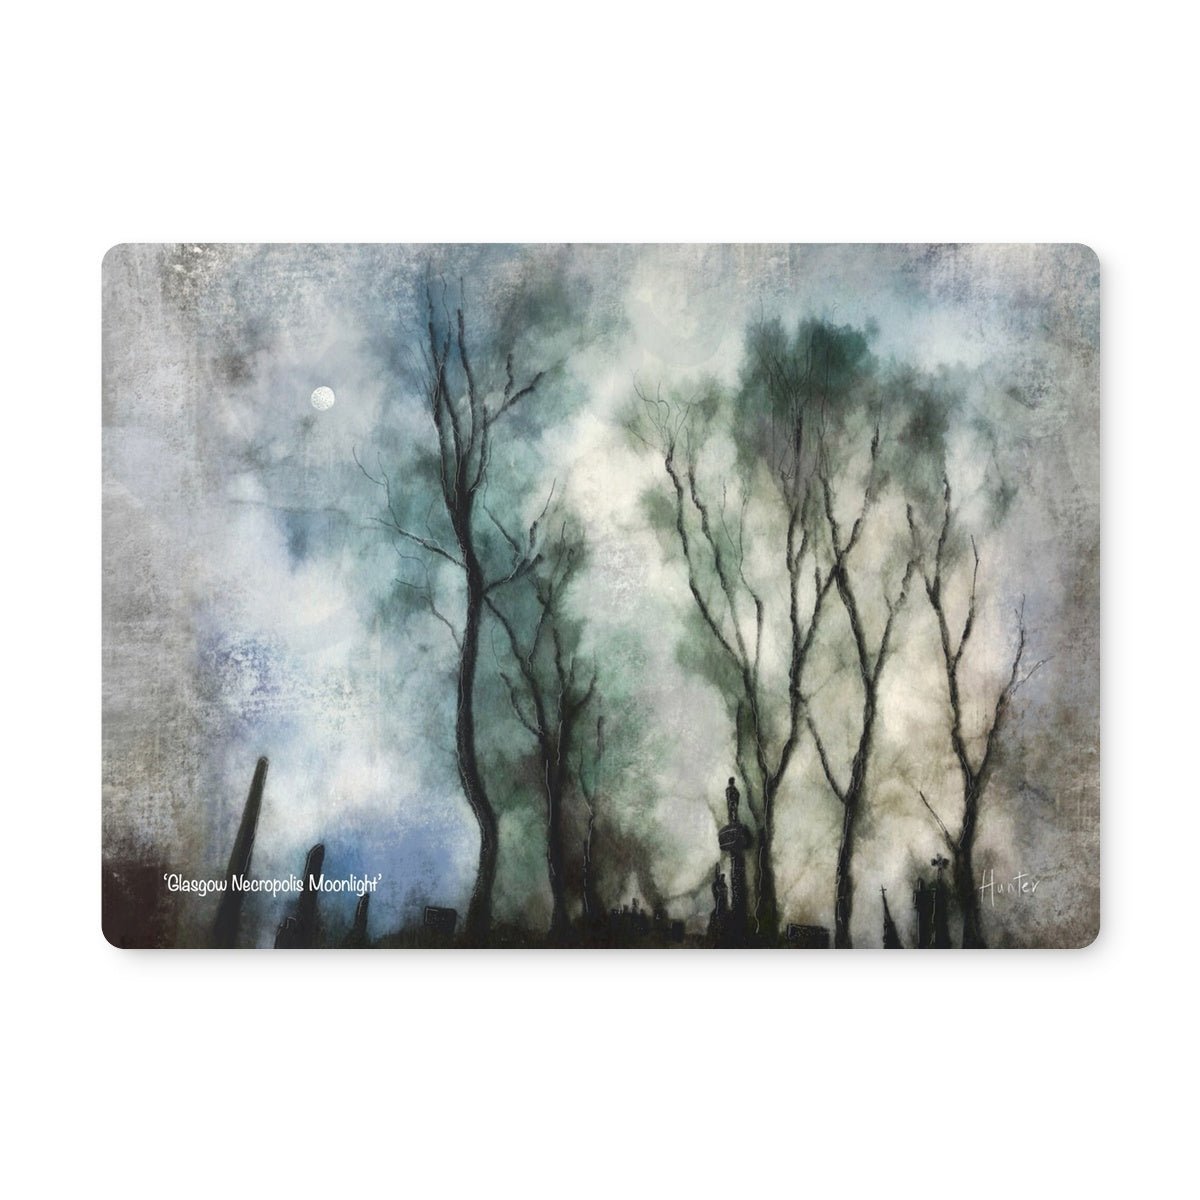 Glasgow Necropolis Moonlight Art Gifts Placemat-Placemats-Edinburgh & Glasgow Art Gallery-Single Placemat-Paintings, Prints, Homeware, Art Gifts From Scotland By Scottish Artist Kevin Hunter